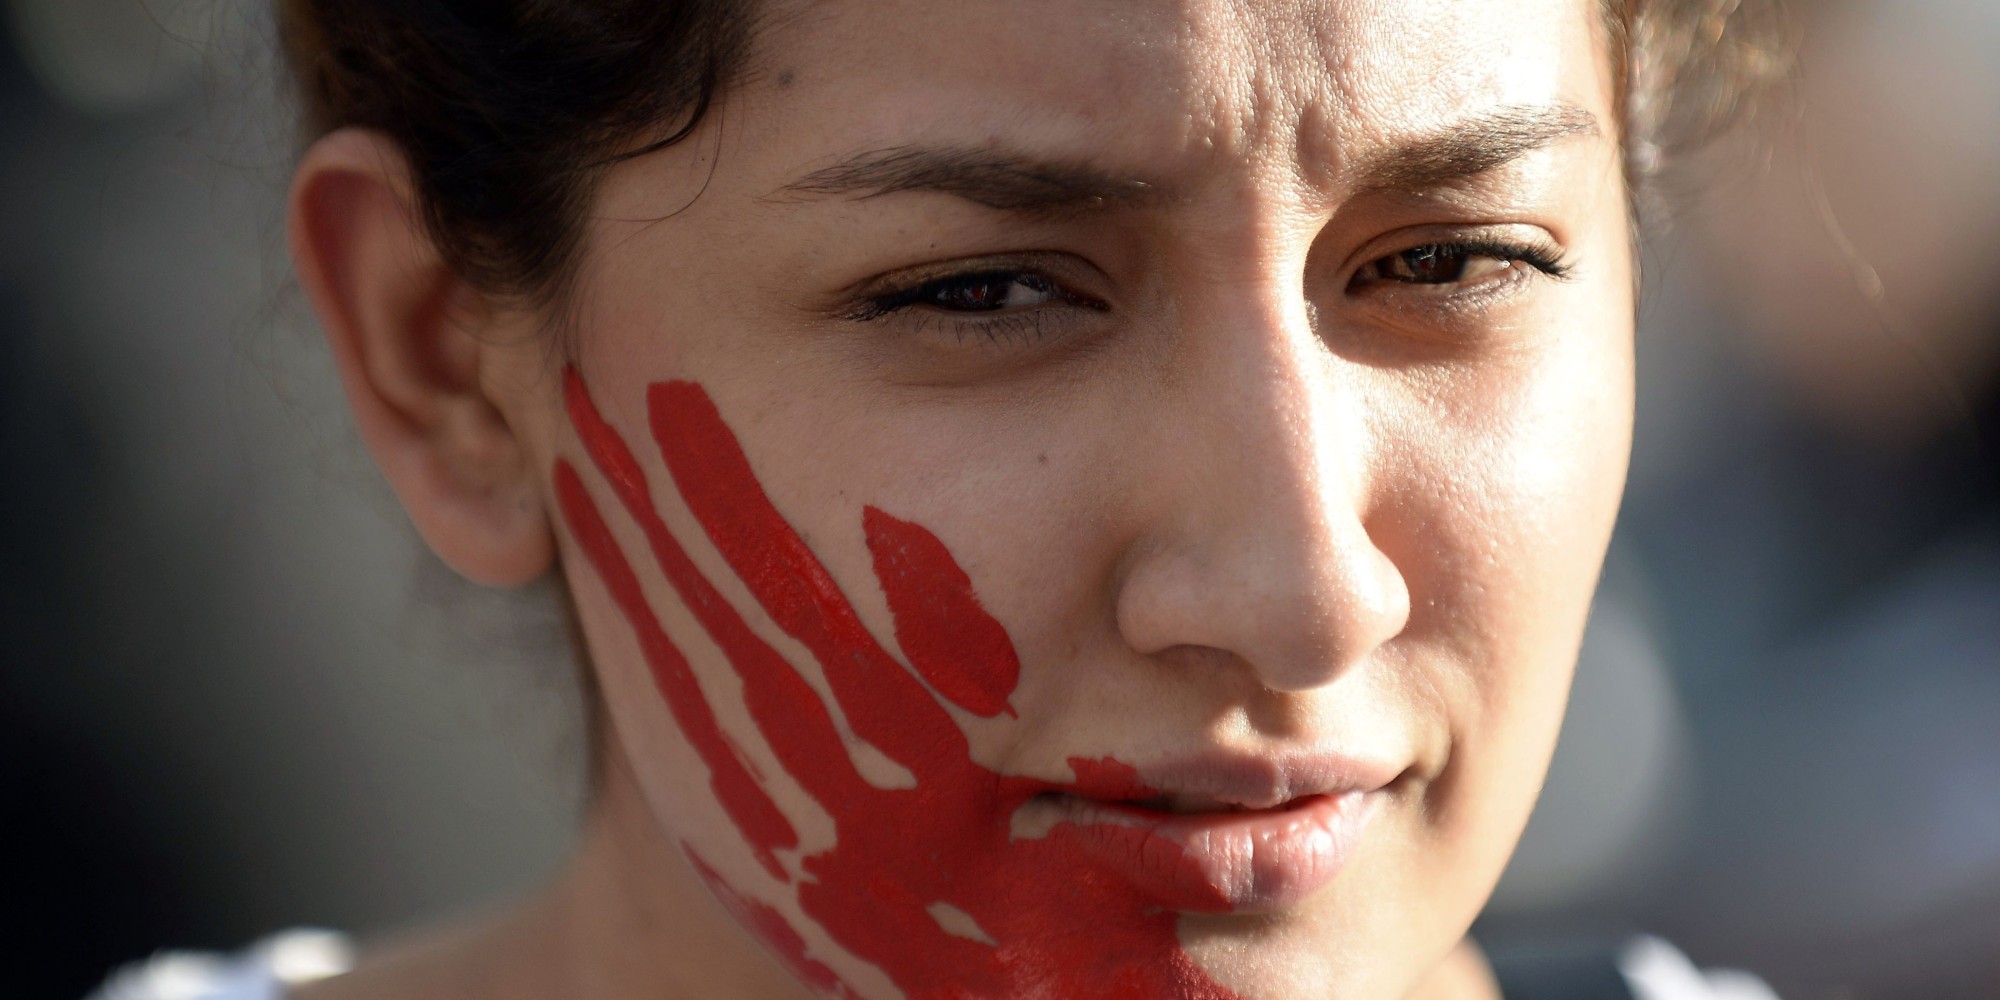 Wave Of Femicide Surges Across Mexico, Killing 6 Women Per Day | HuffPost